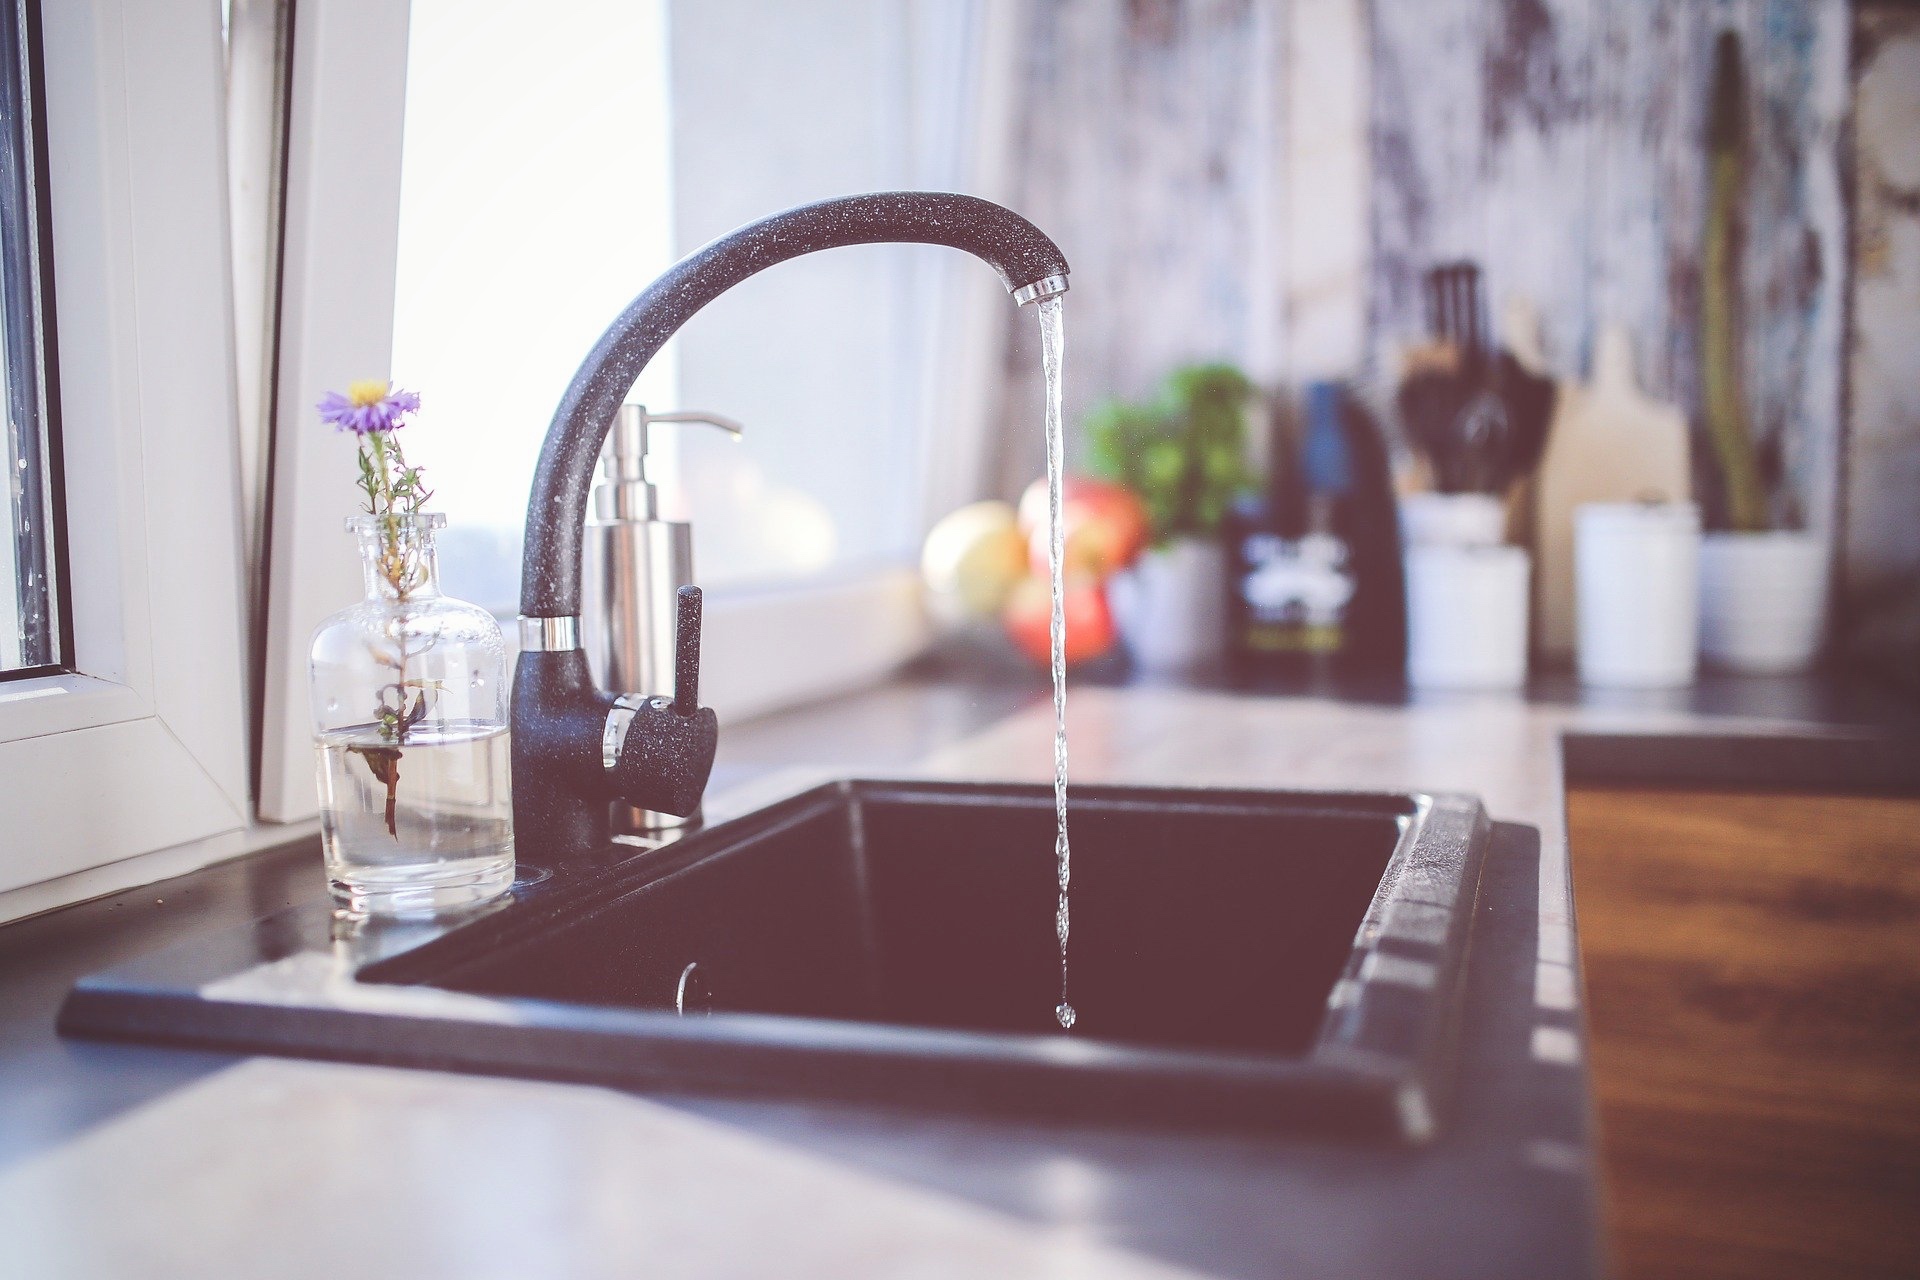 How to reduce your household water consumption